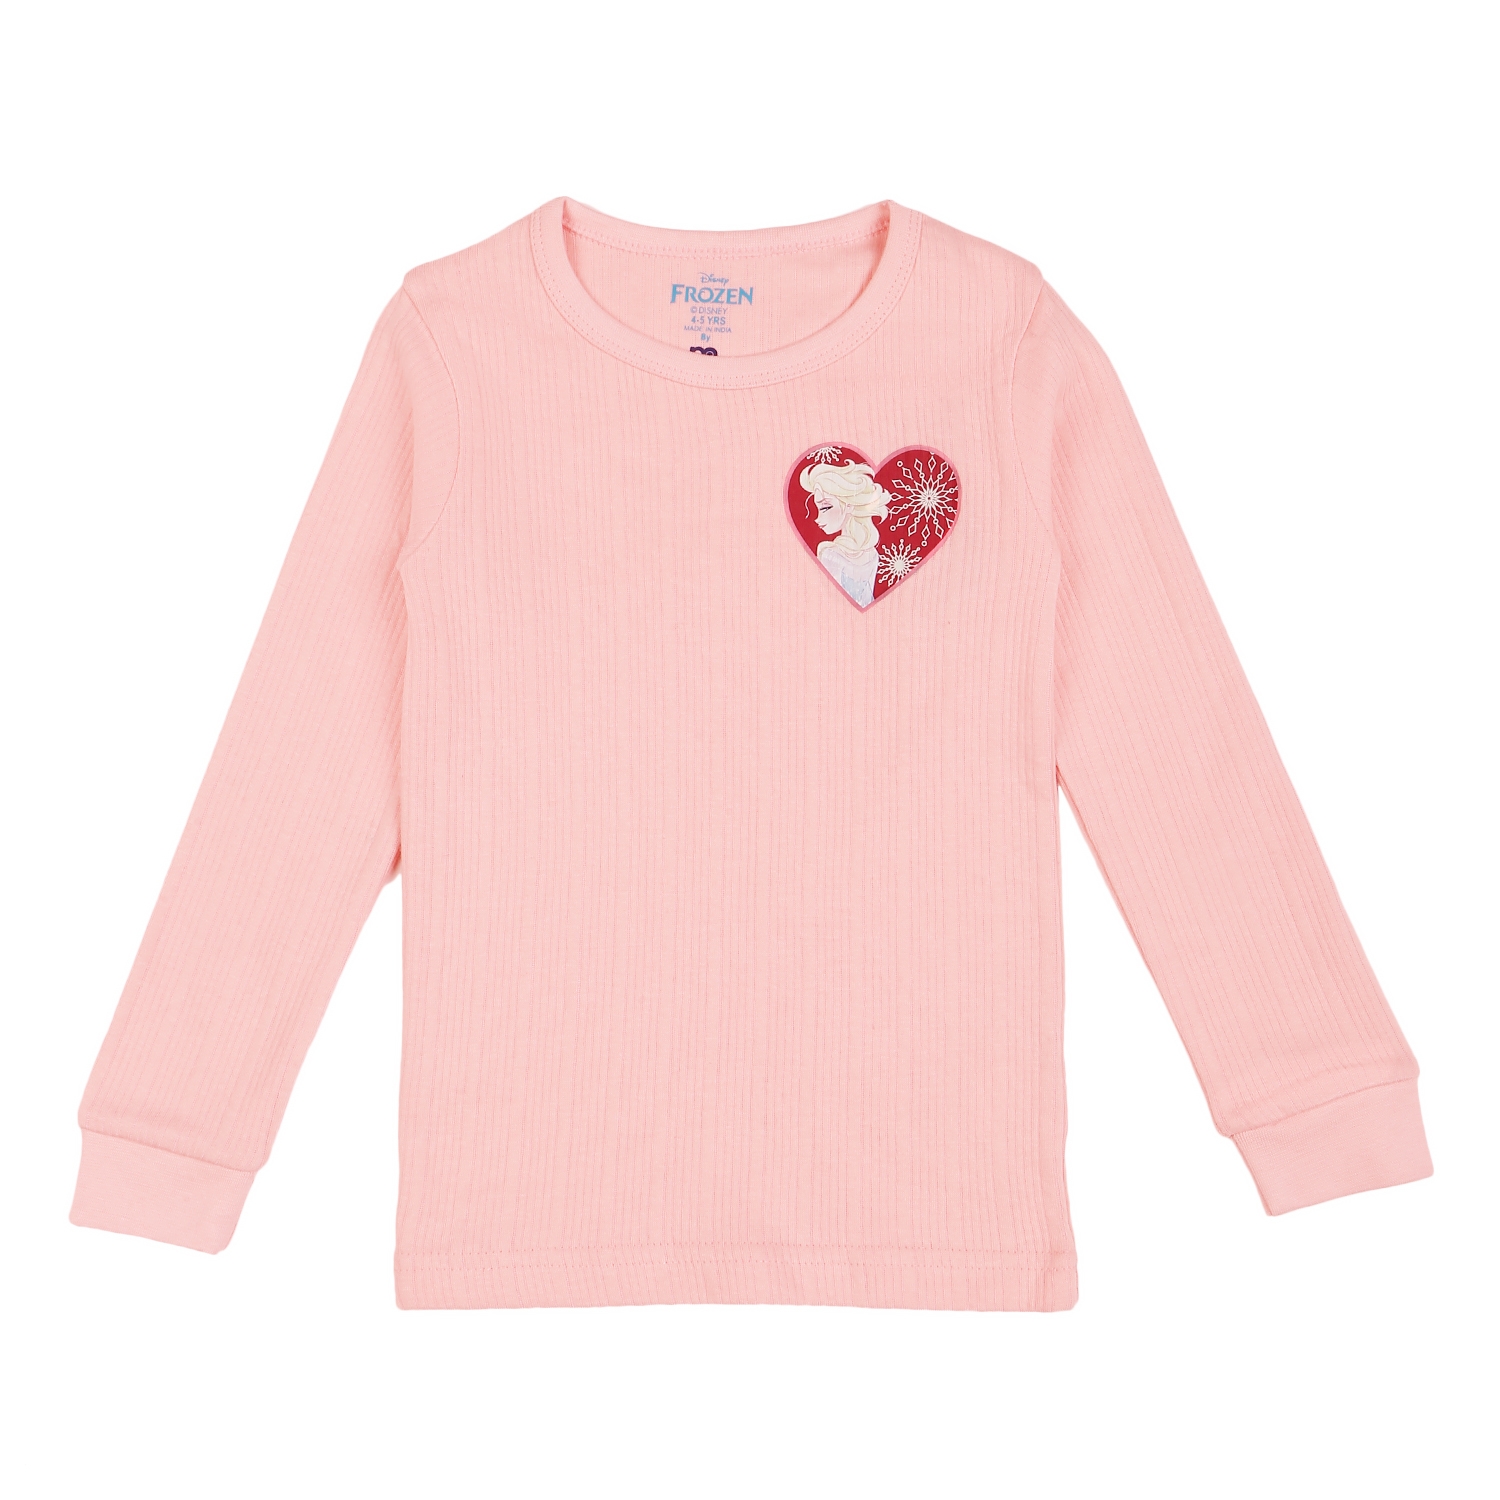 Mothercare | Girls Full Sleeves Frozen Thermal Vest-Pink 1